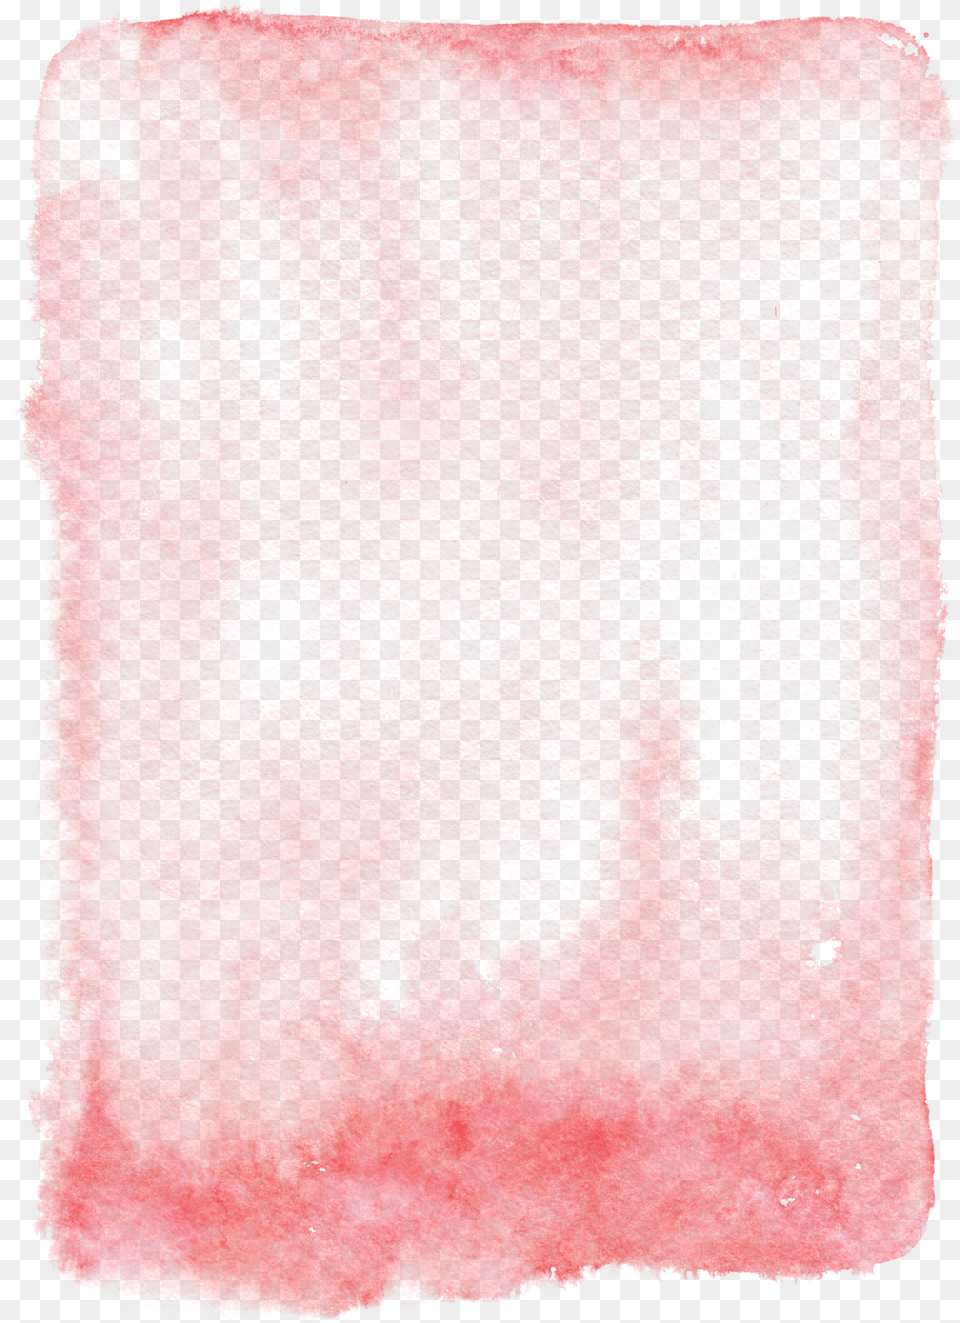 Watercolor Paint Free Png Download